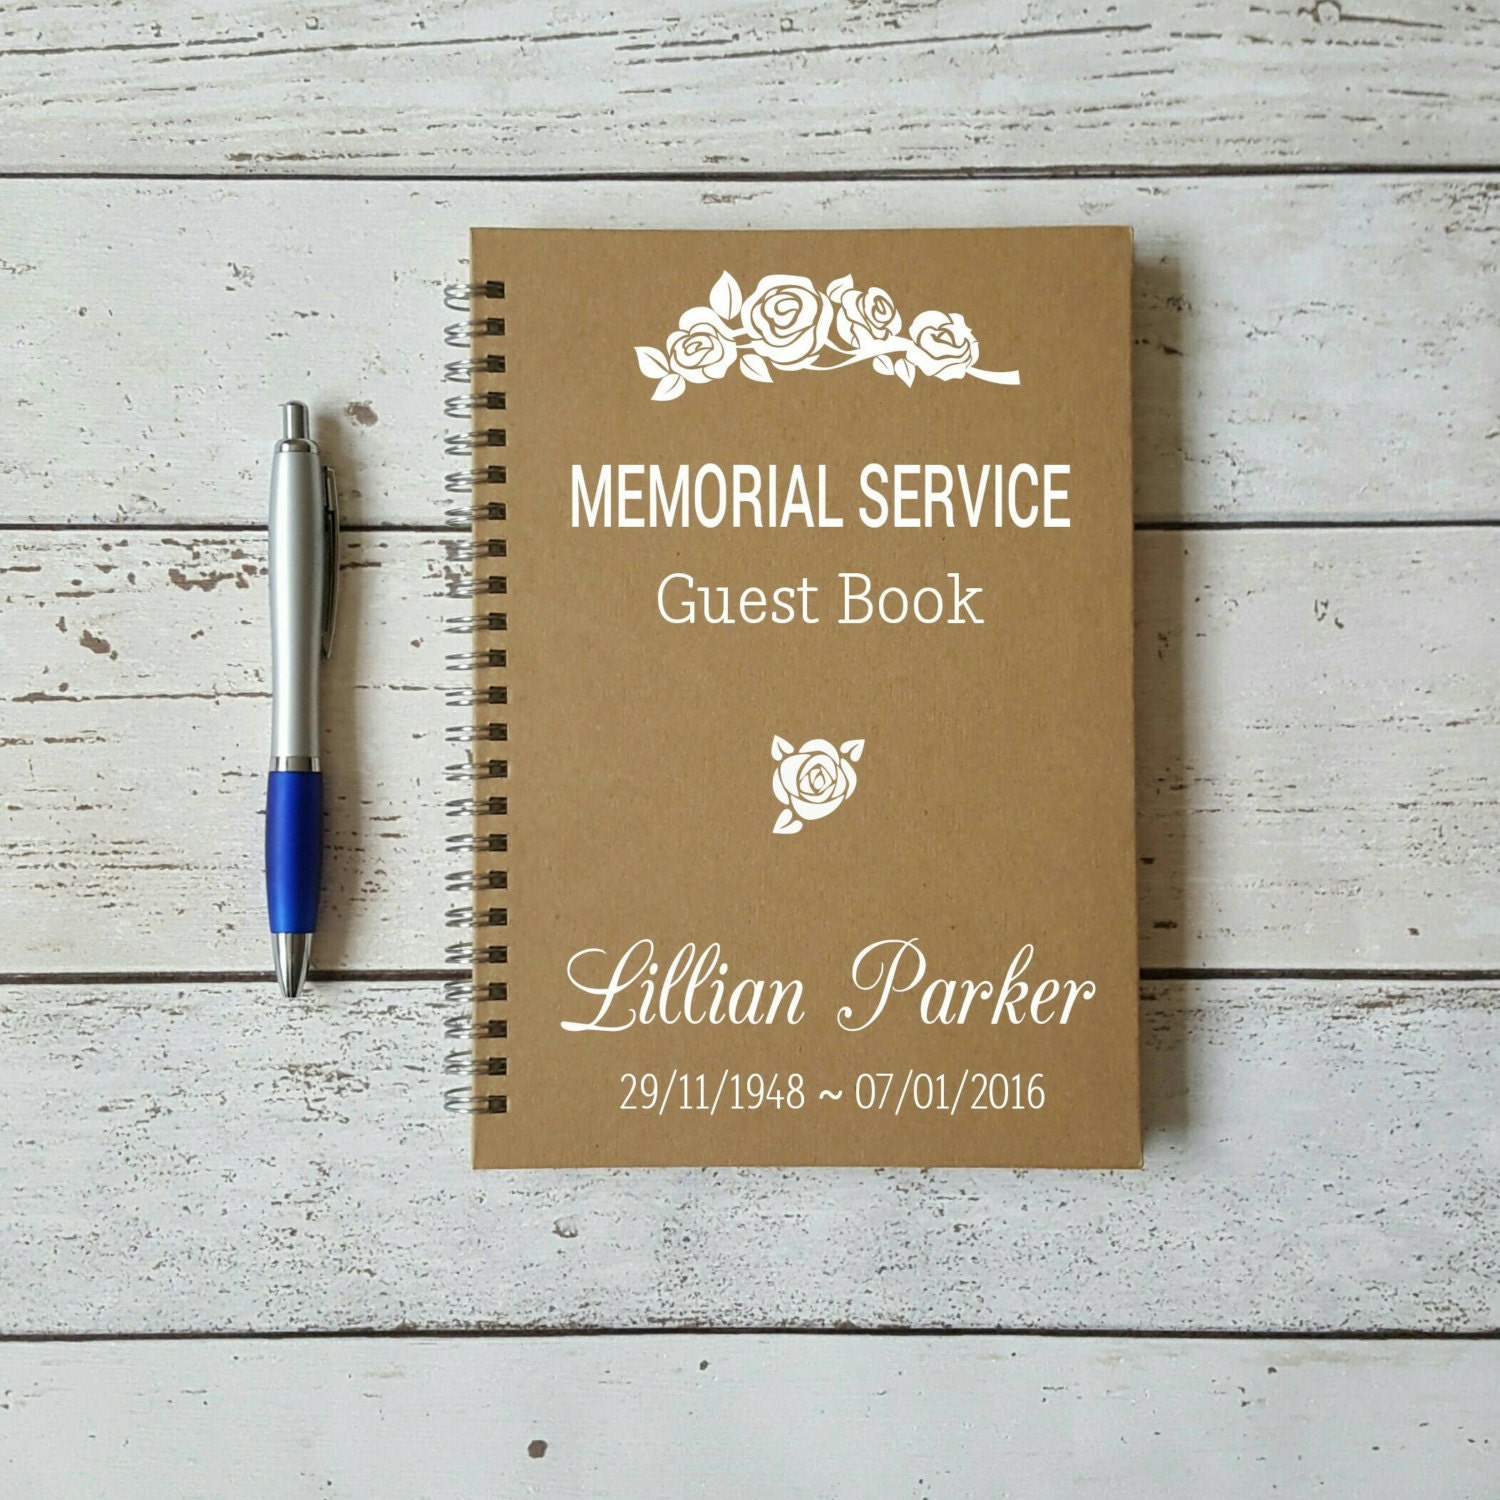 Personalised Memorial Service Guest Book by Craftformers on Etsy